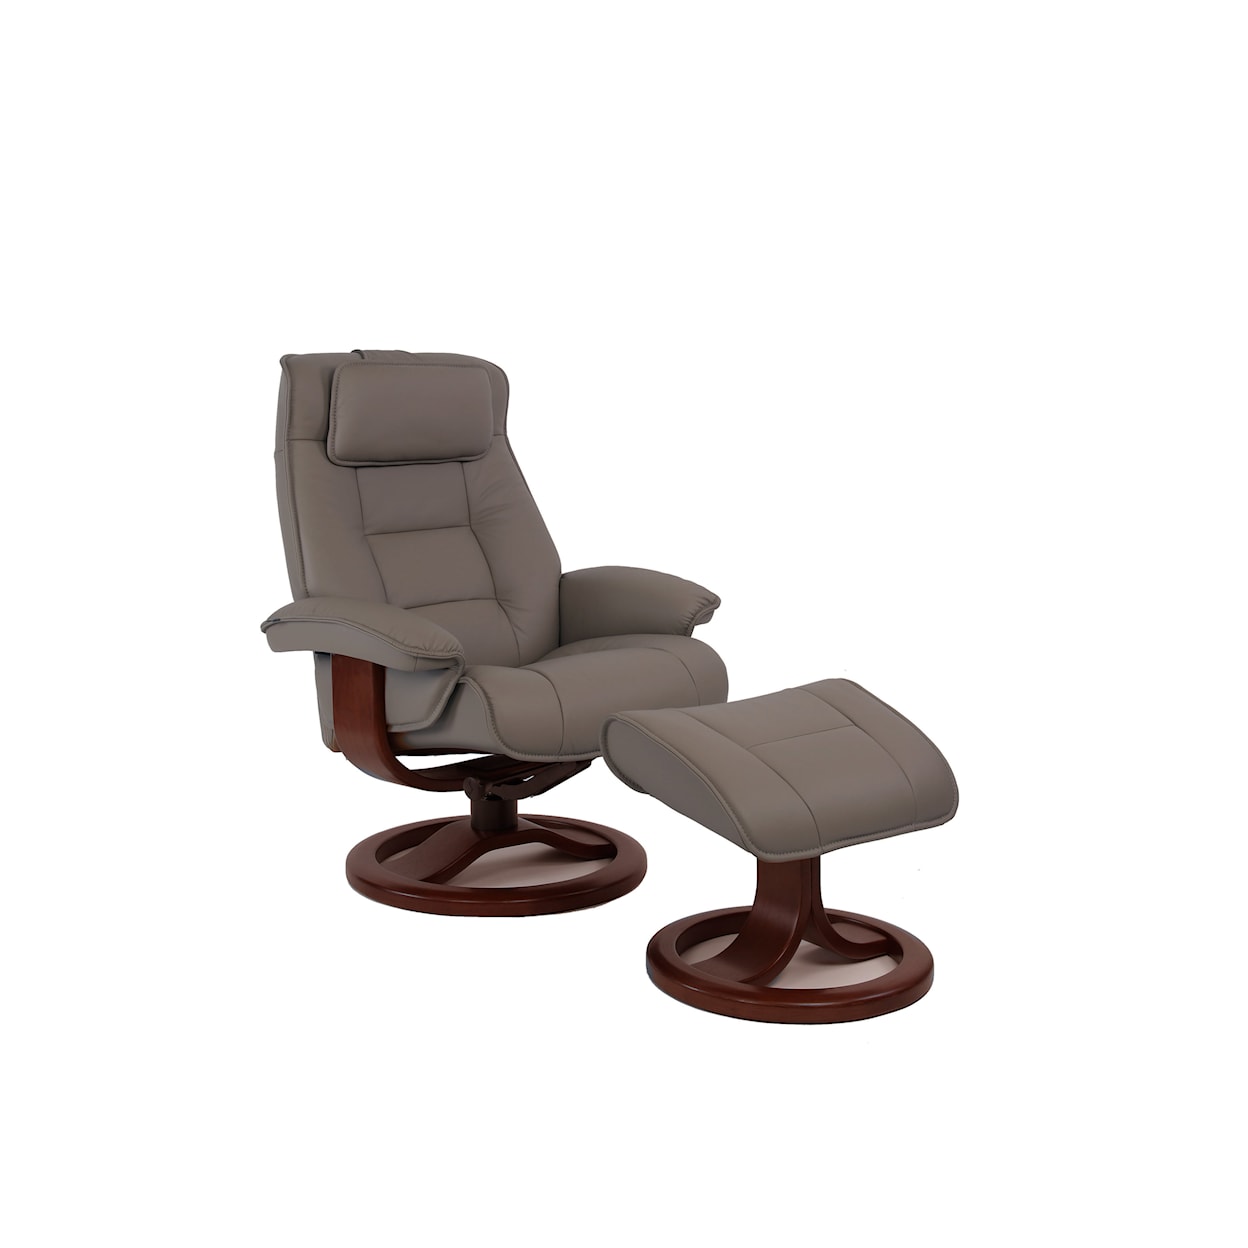 Fjords by Hjellegjerde Classic Comfort Collection Mustang R Large Manual Recliner W/ Footstool